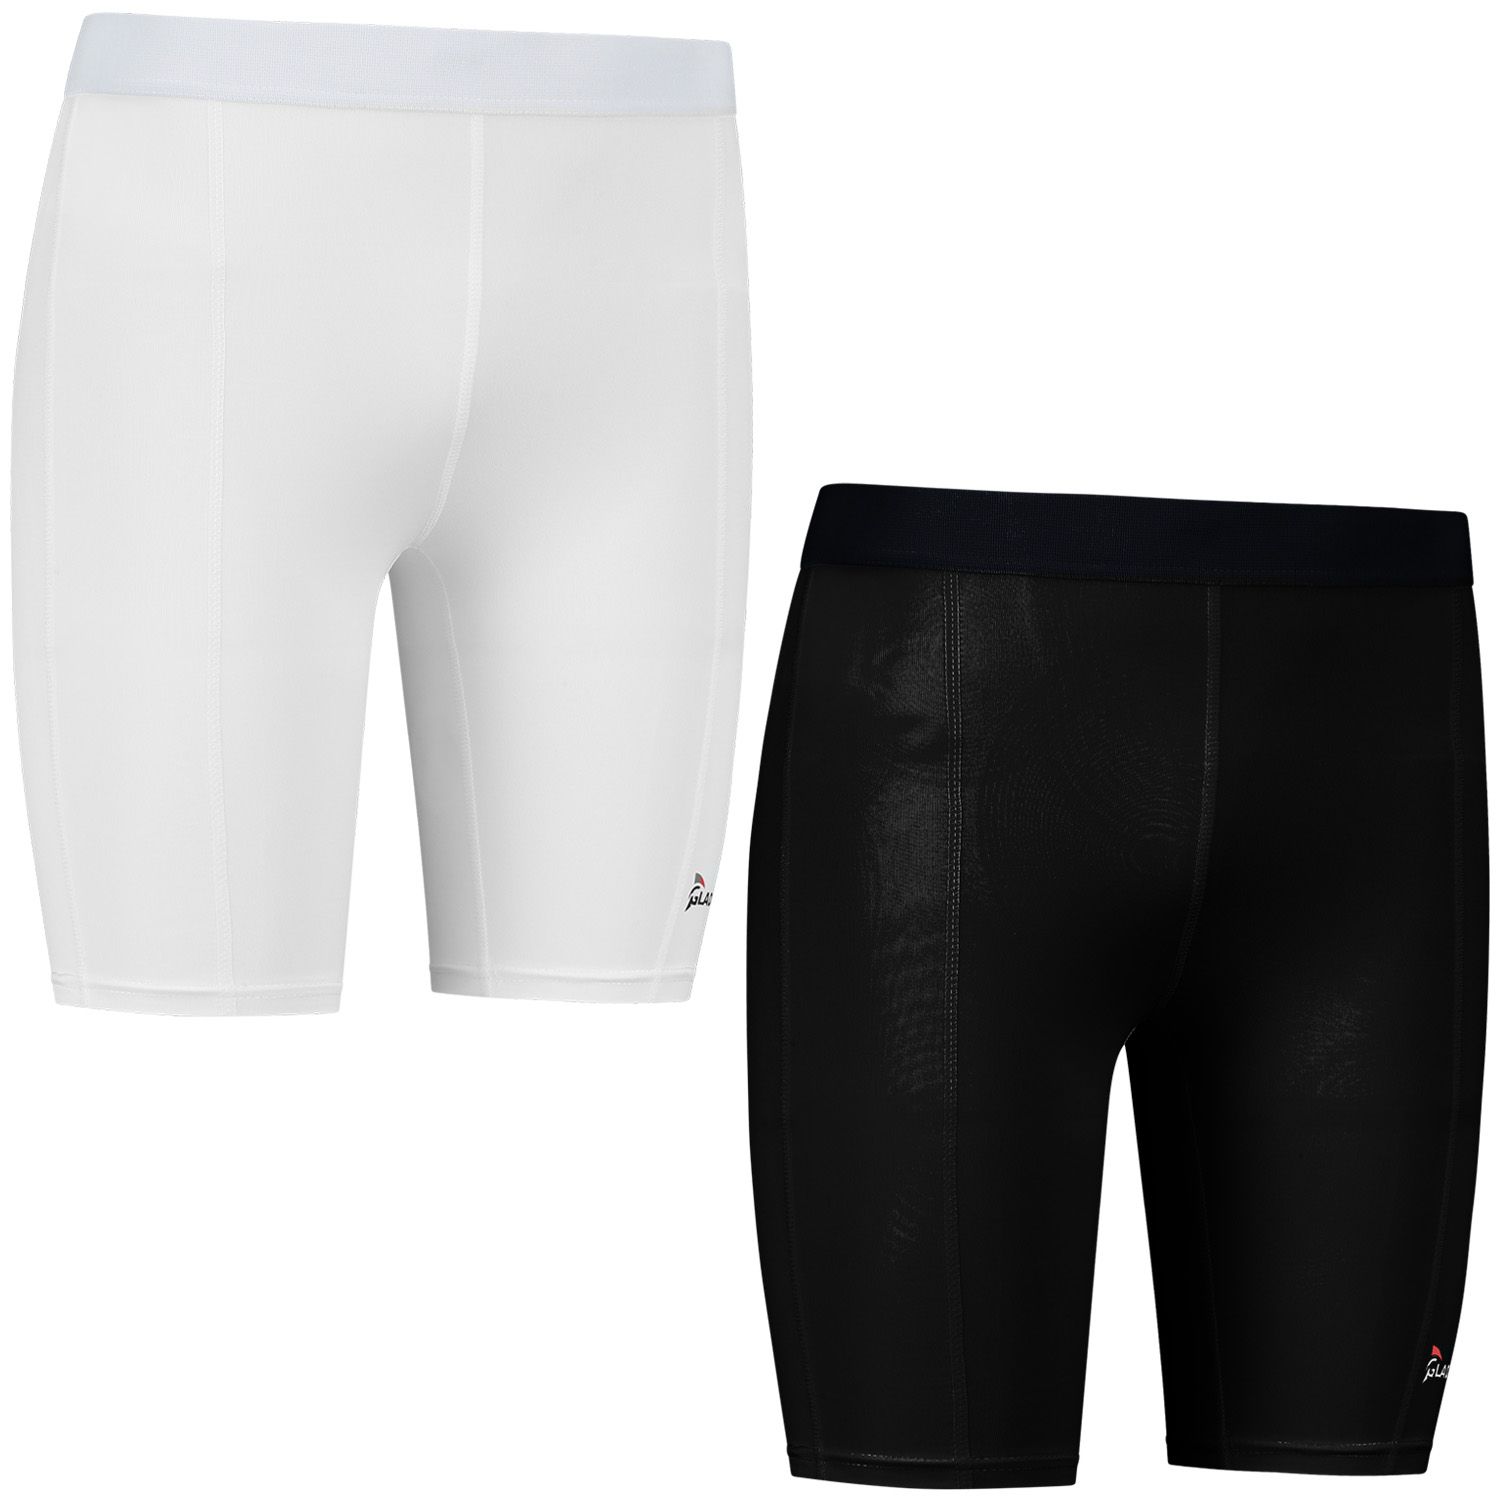 gladiator sports womens compression shorts in black and white